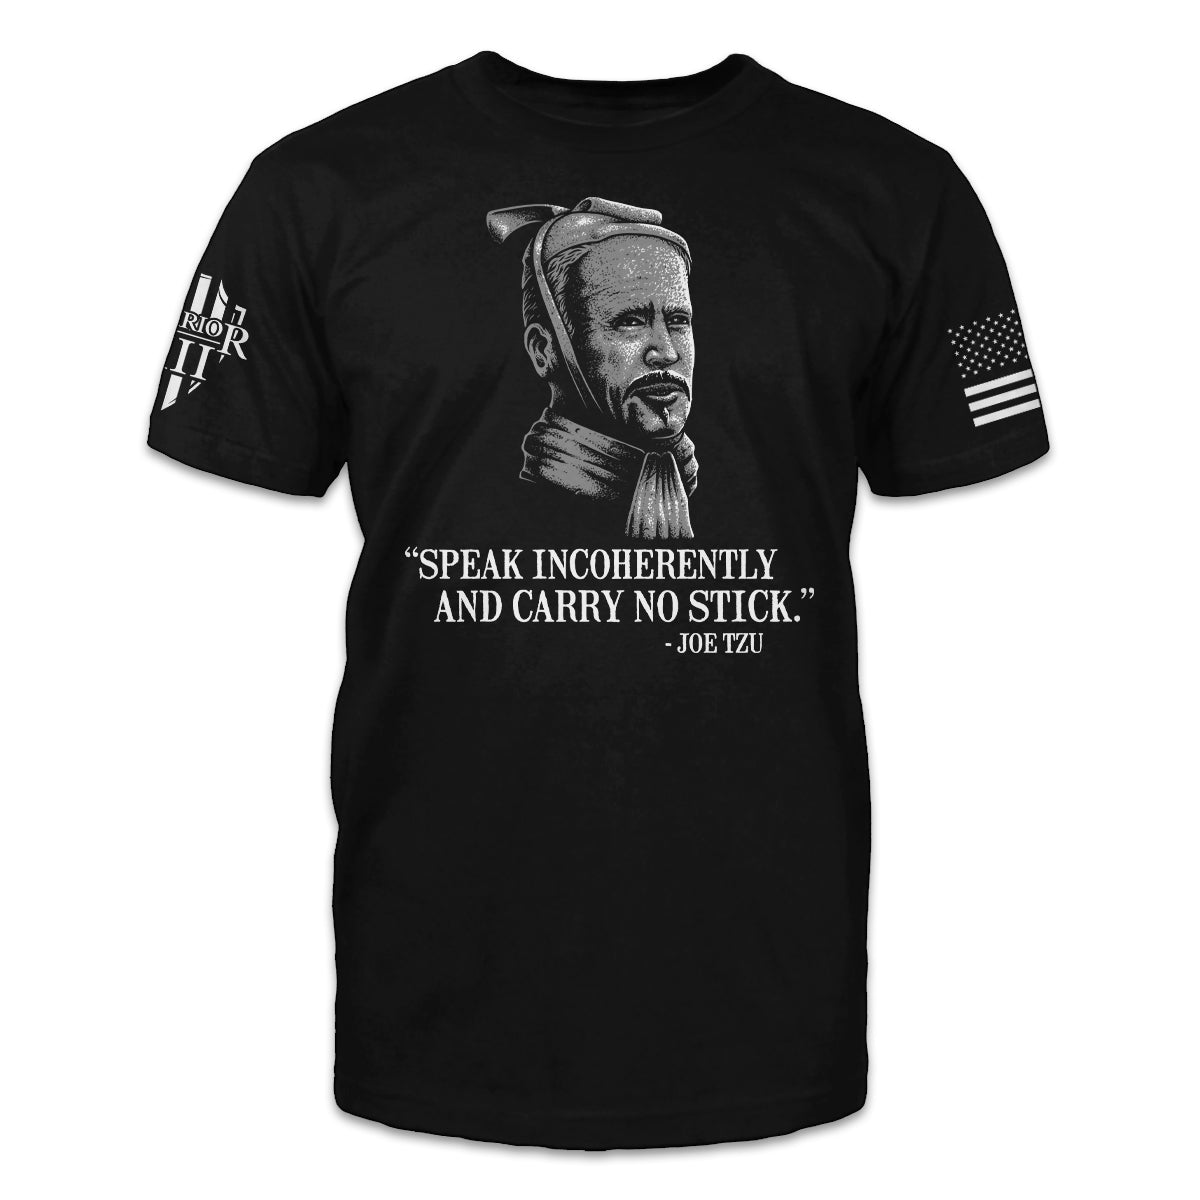 A black t-shirt with the words "Speak incoherently and carry no stick." -Joe Tzu printed on the front of the shirt.